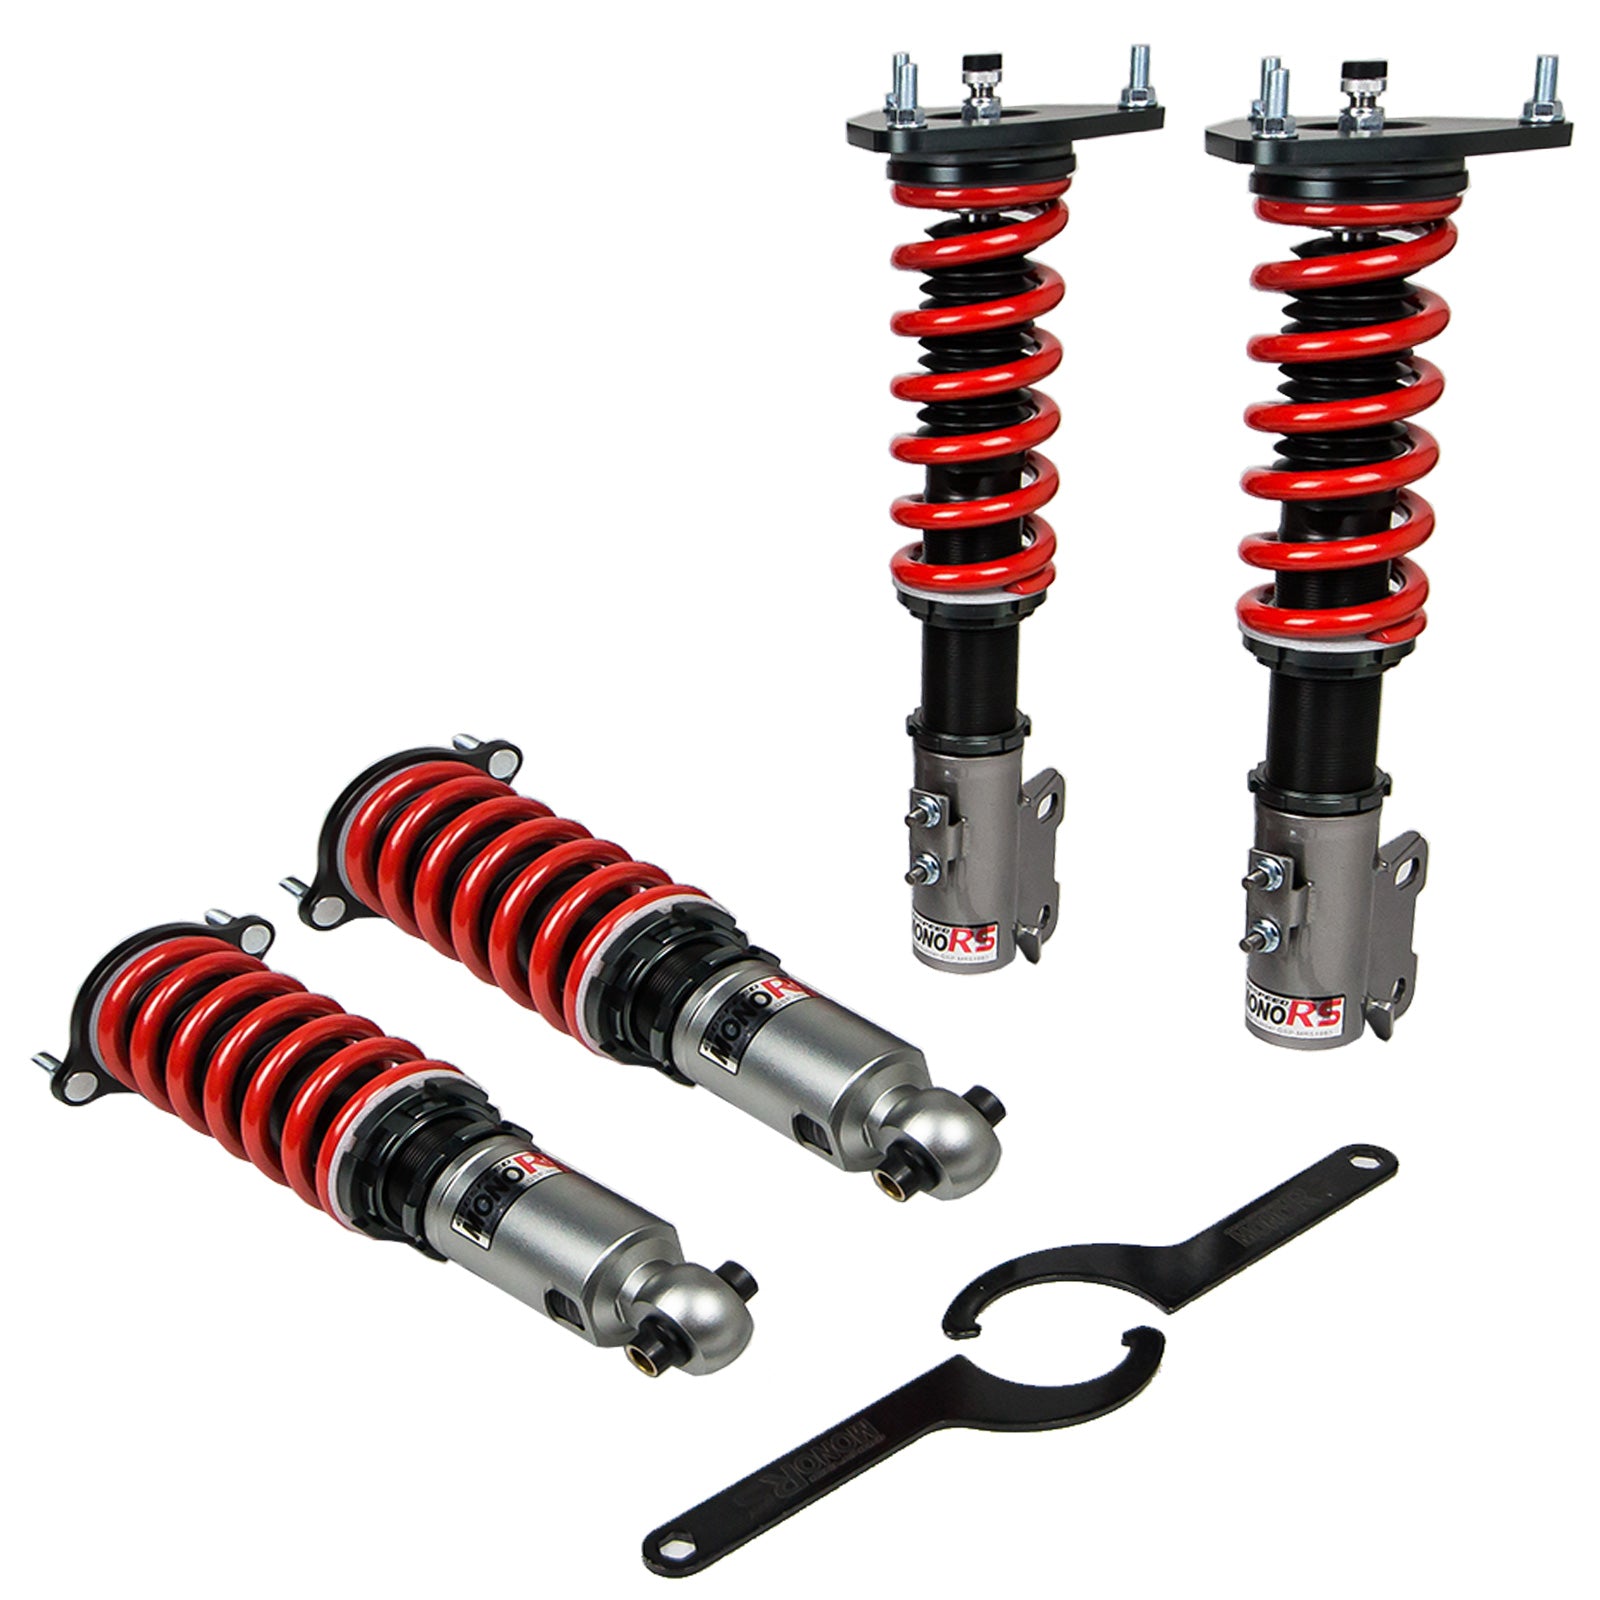 Godspeed MRS1980-A MonoRS Coilover Lowering Kit, 32 Damping Adjustment, Ride Height Adjustable